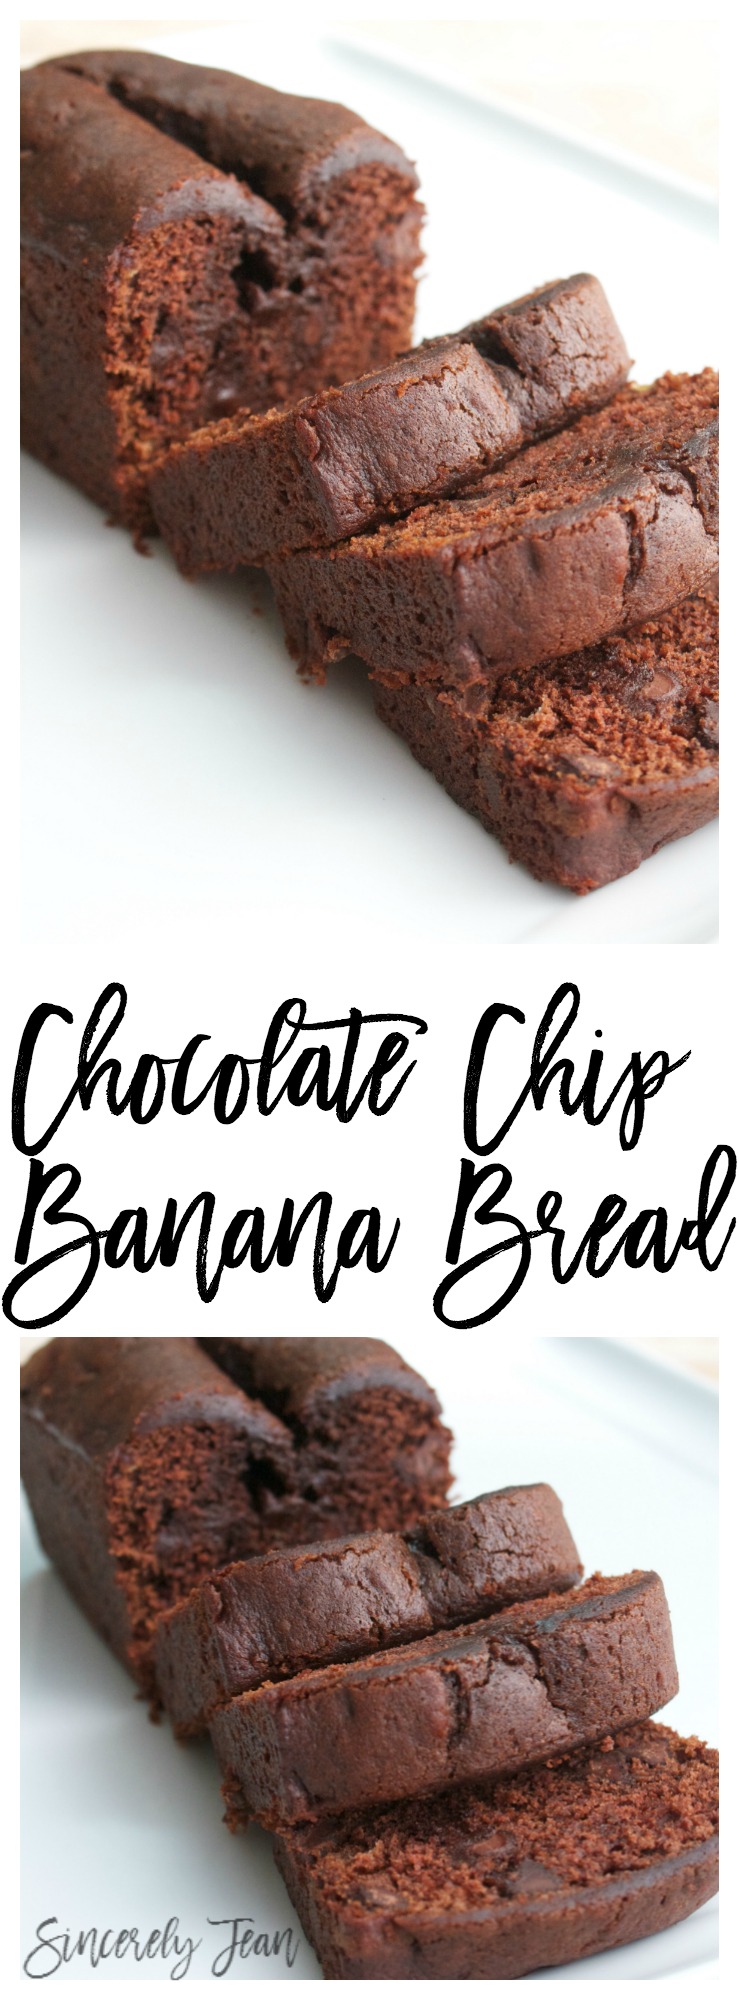 Chocolate Chip Banana Bread- easy recipe- delicious and fast